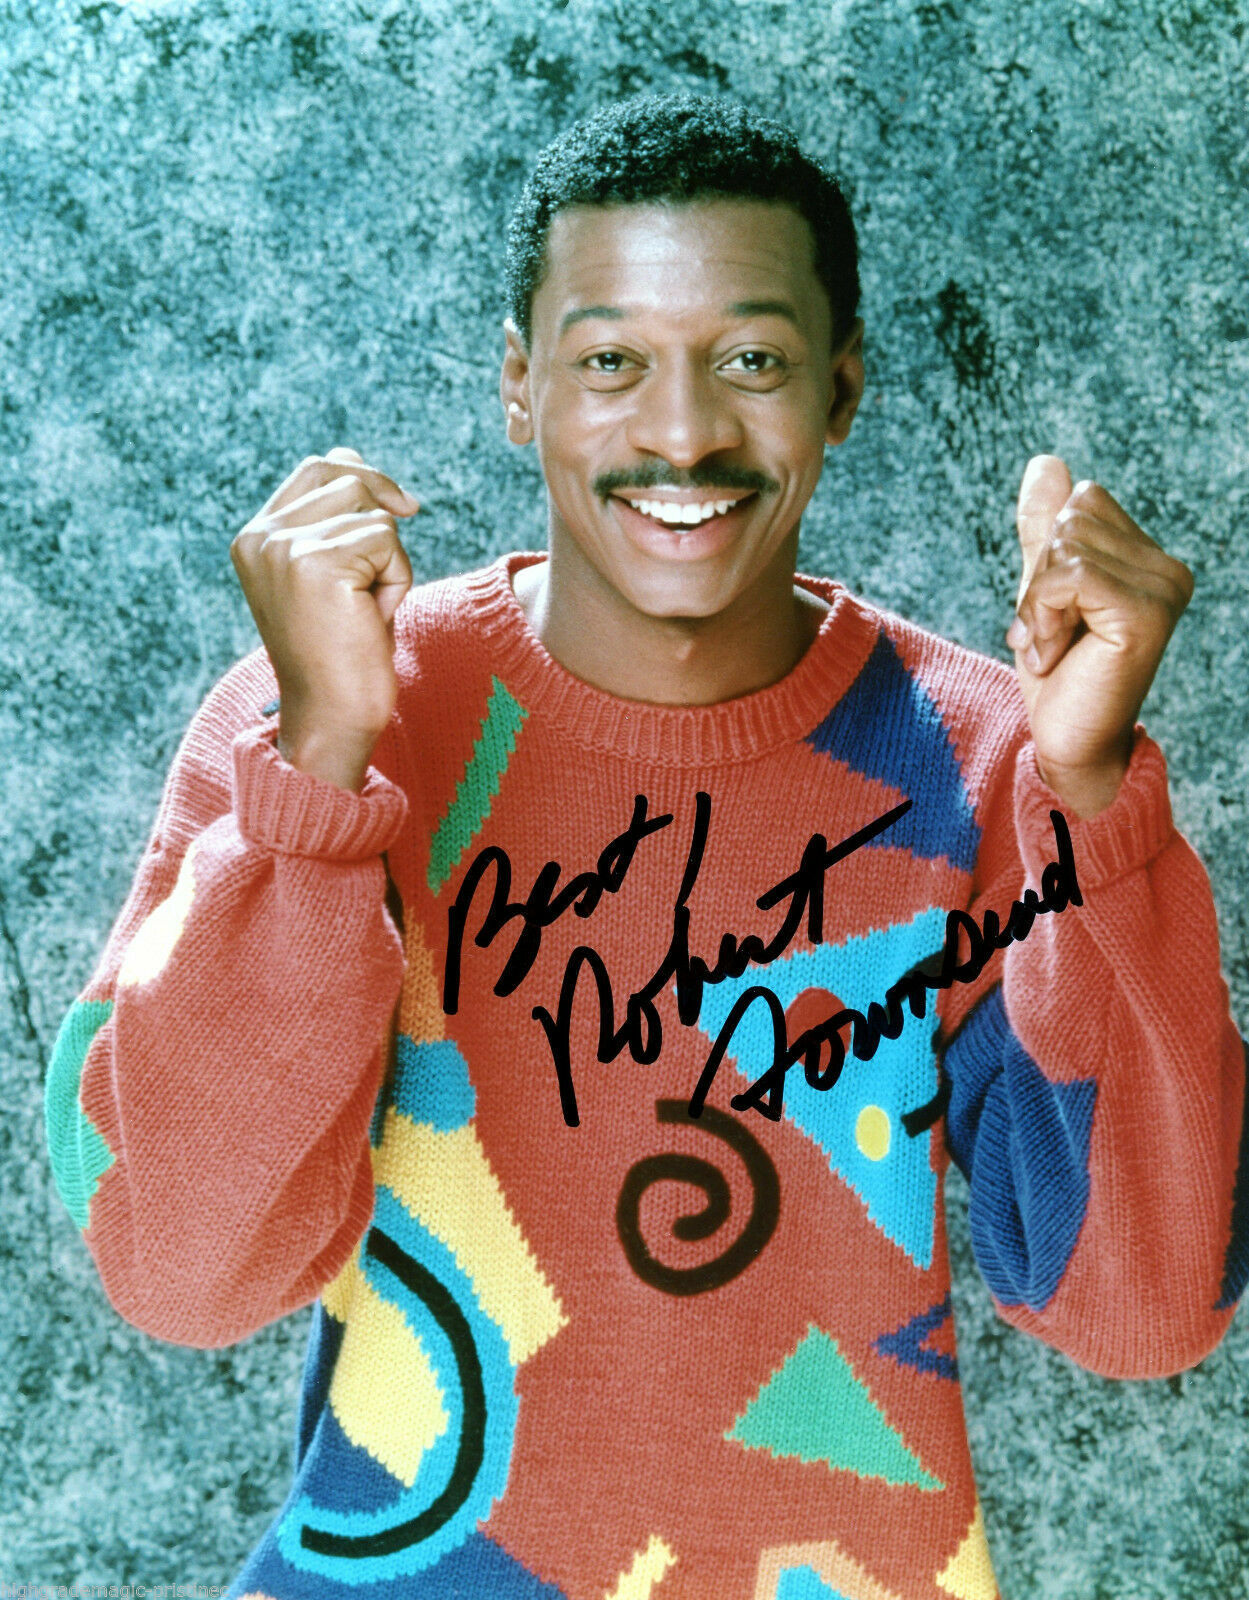 ROBERT TOWNSEND AUTOGRAPHED SIGNED 8X10 WEARING AN UGLY SWEATER AND SMILING